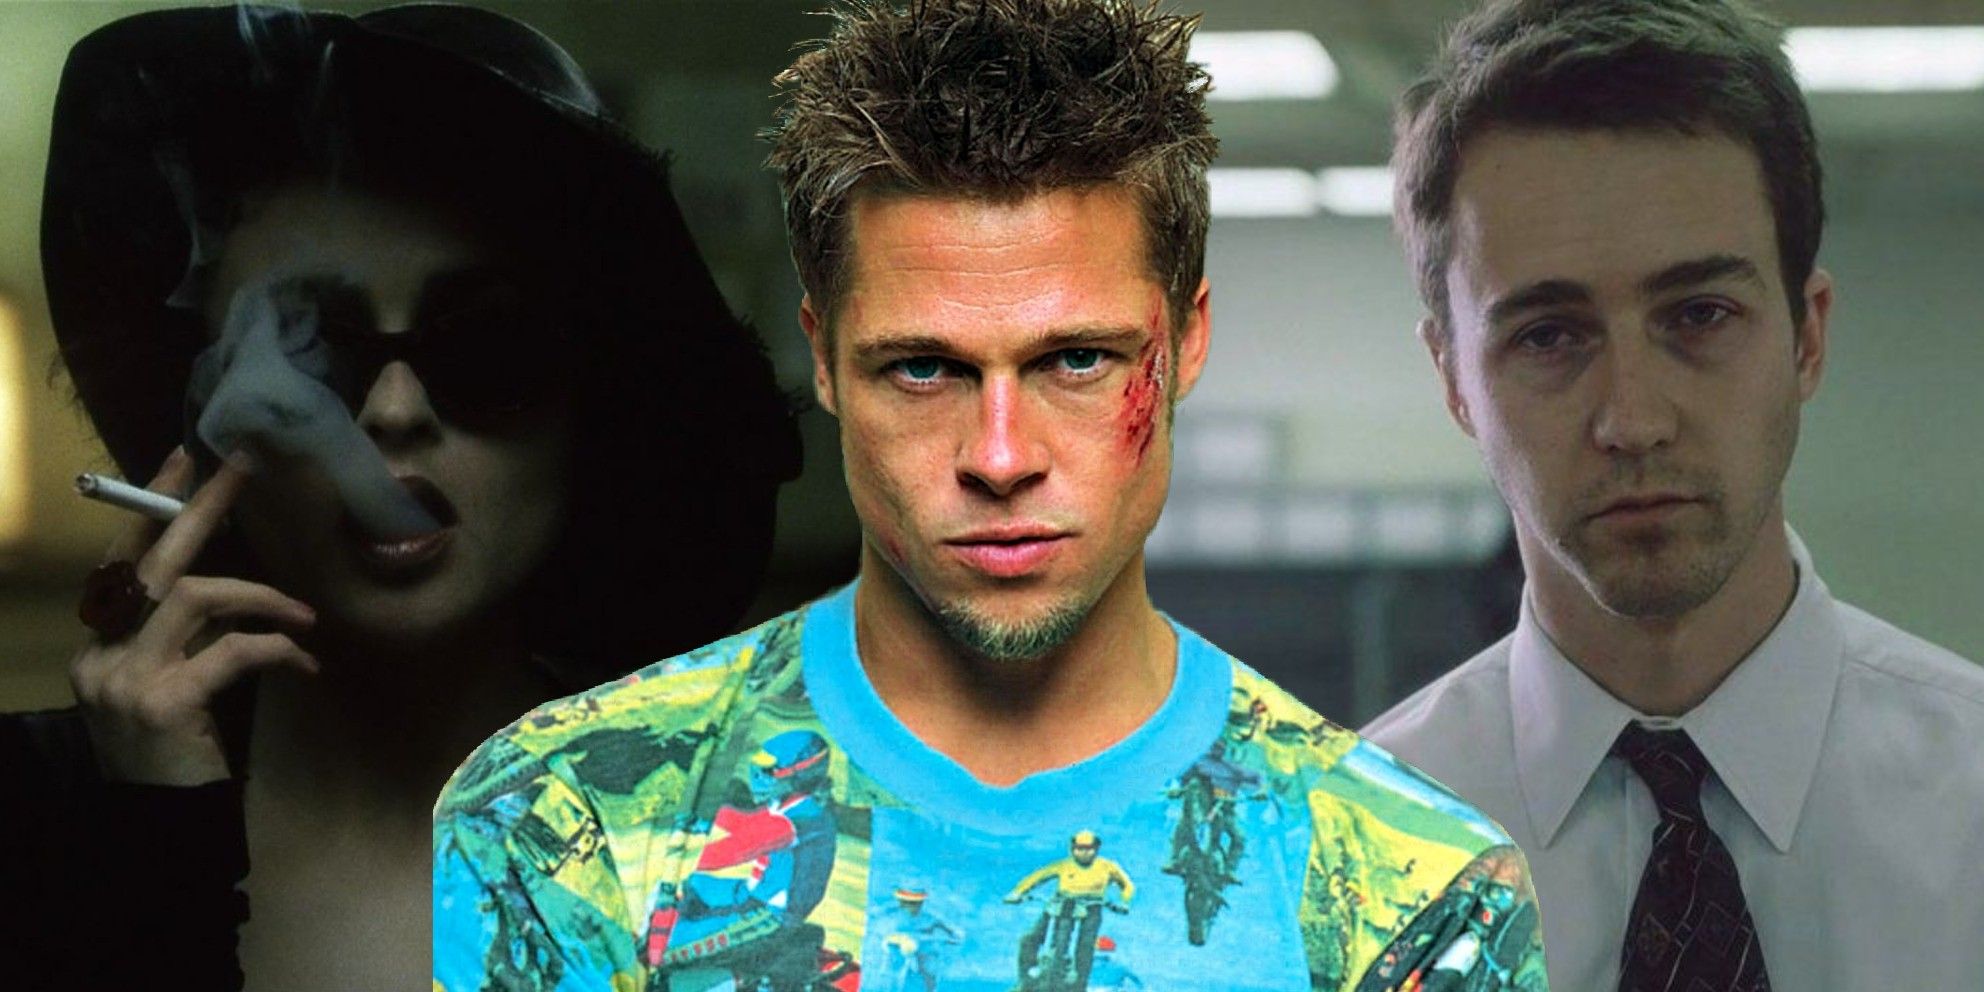 The Real Reason Fight Club Bombed At The Box Office